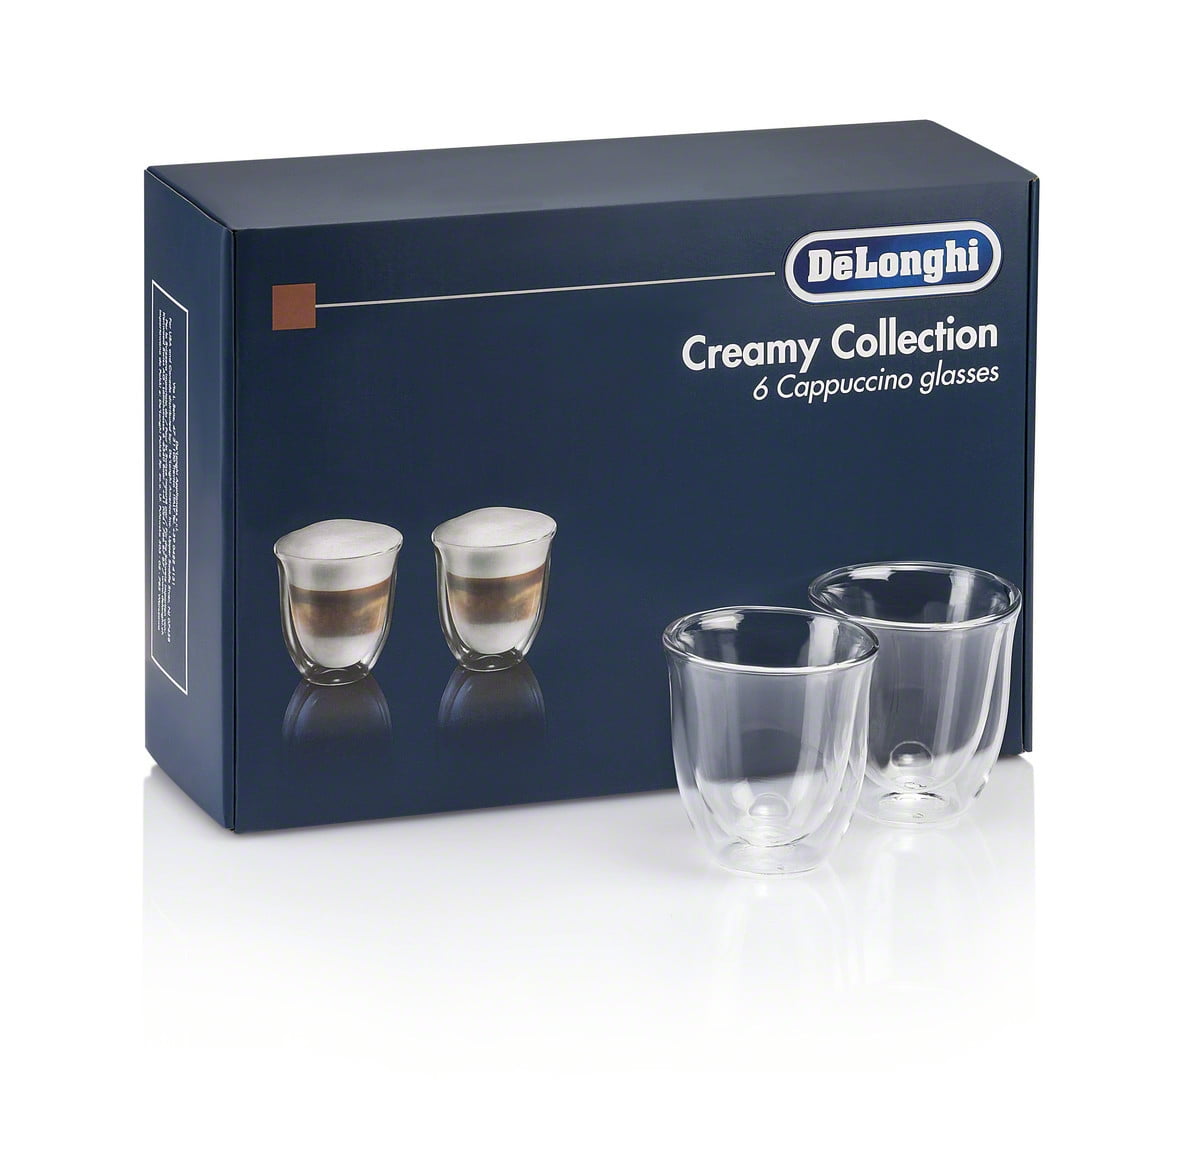 De'Longhi Gift Set 6 Cappuccino Double Wall Thermal Glasses